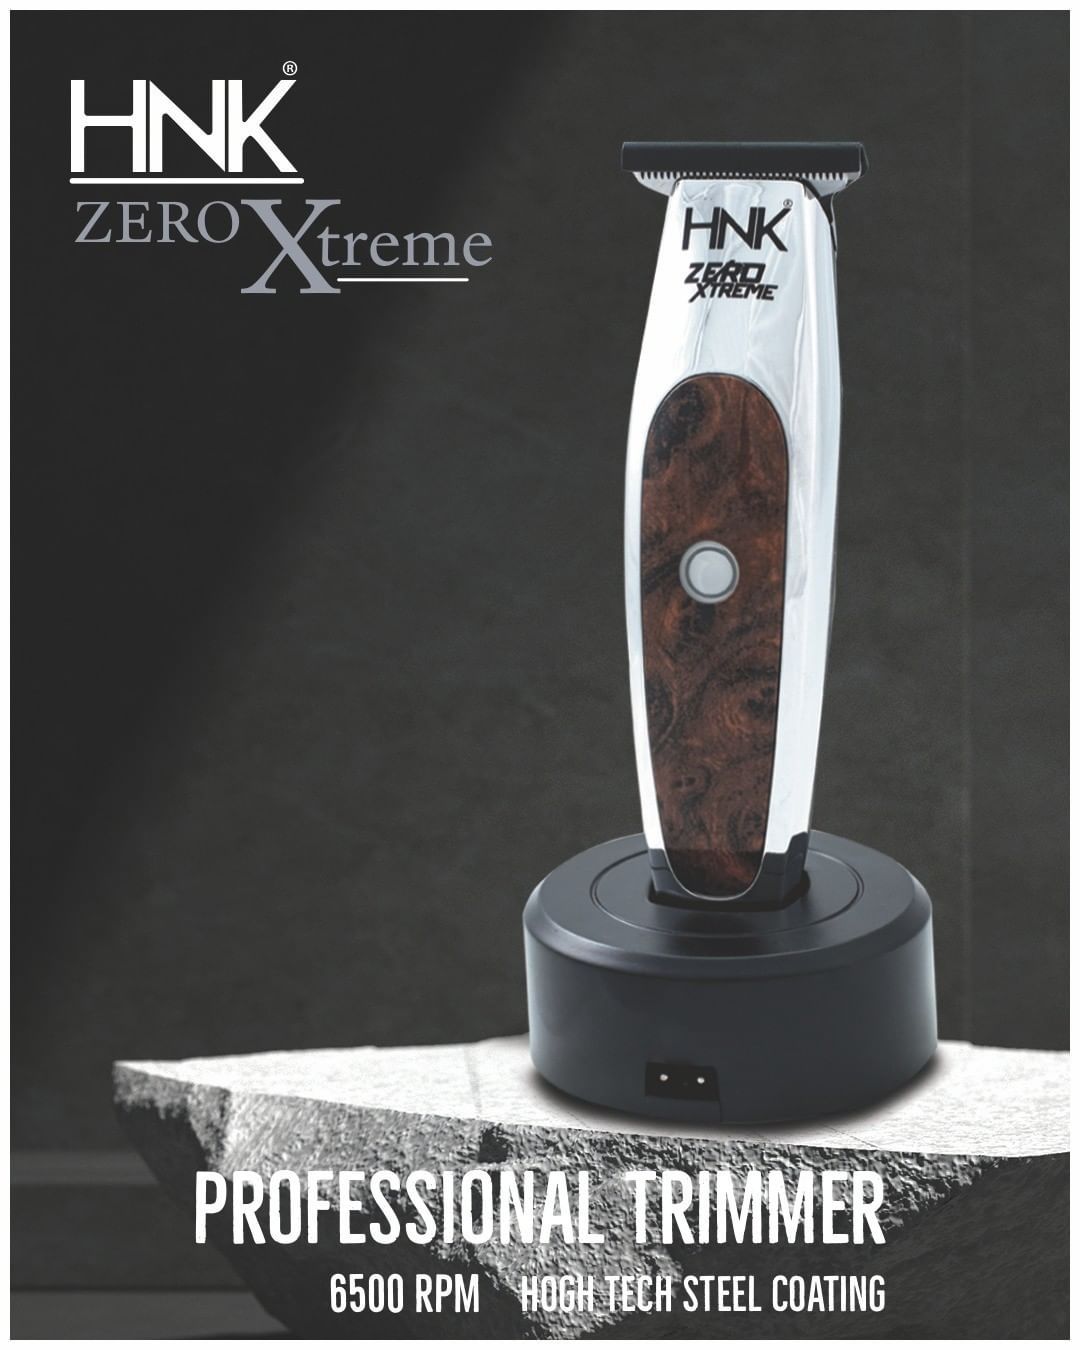 HNK ZERO XTREME PROFESSIONAL TRIMMER